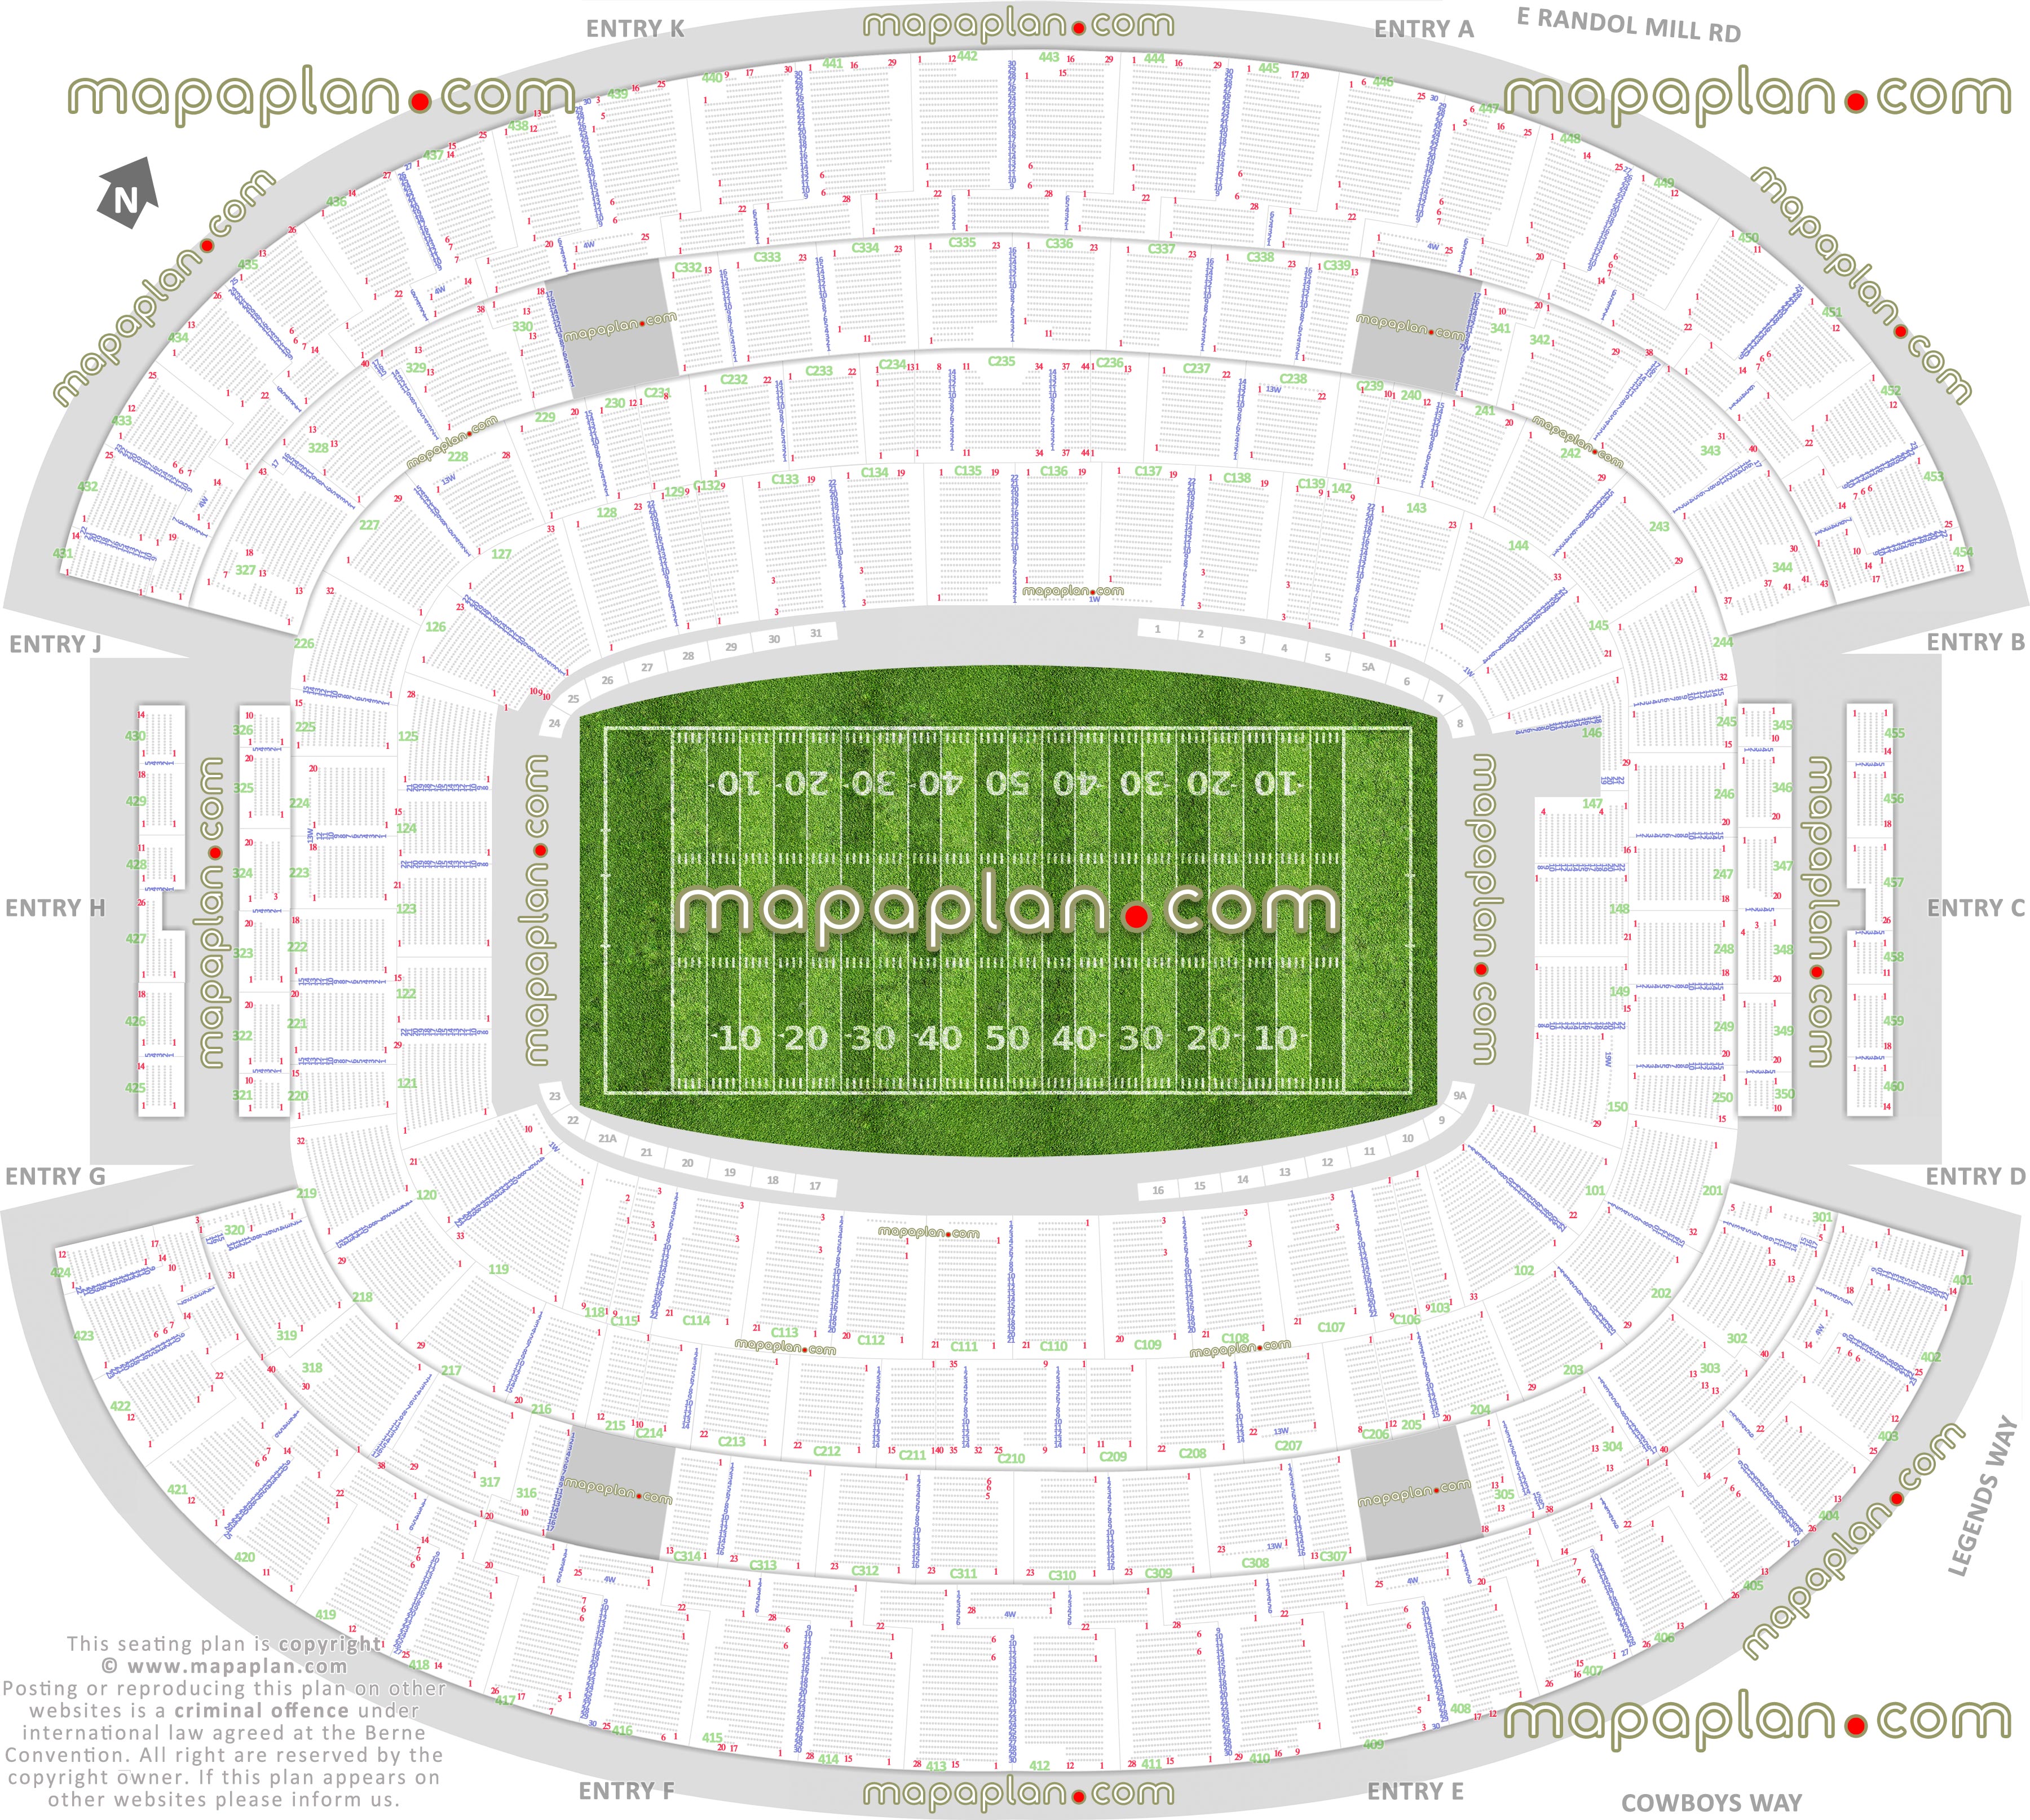 Cowboys Stadium Seating Chart By Row